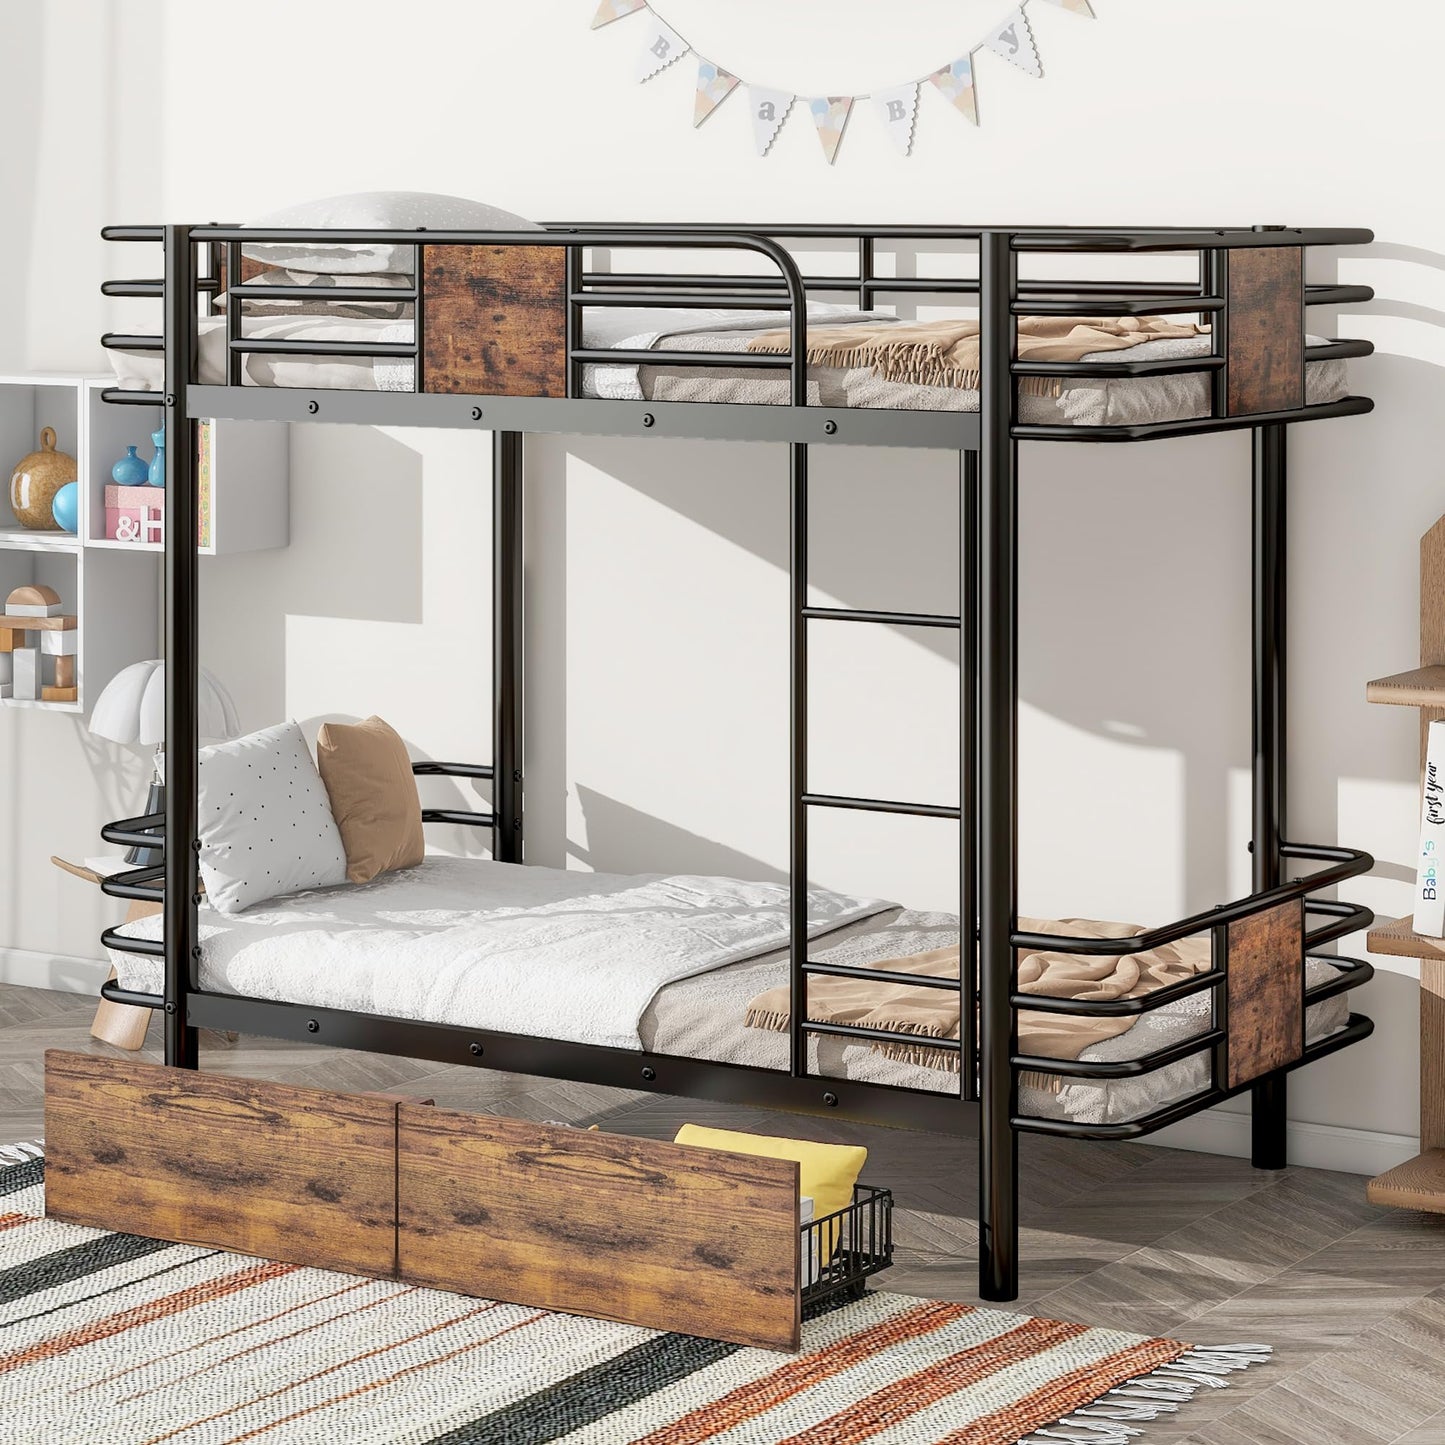 Bunk Bed Twin XL Over Twin XL, Metal Bunk Bed with Storage Drawers and MDF Board Guardrail, Modern Industrial Bunk Bed for Kids Boys Girls Teens, Black